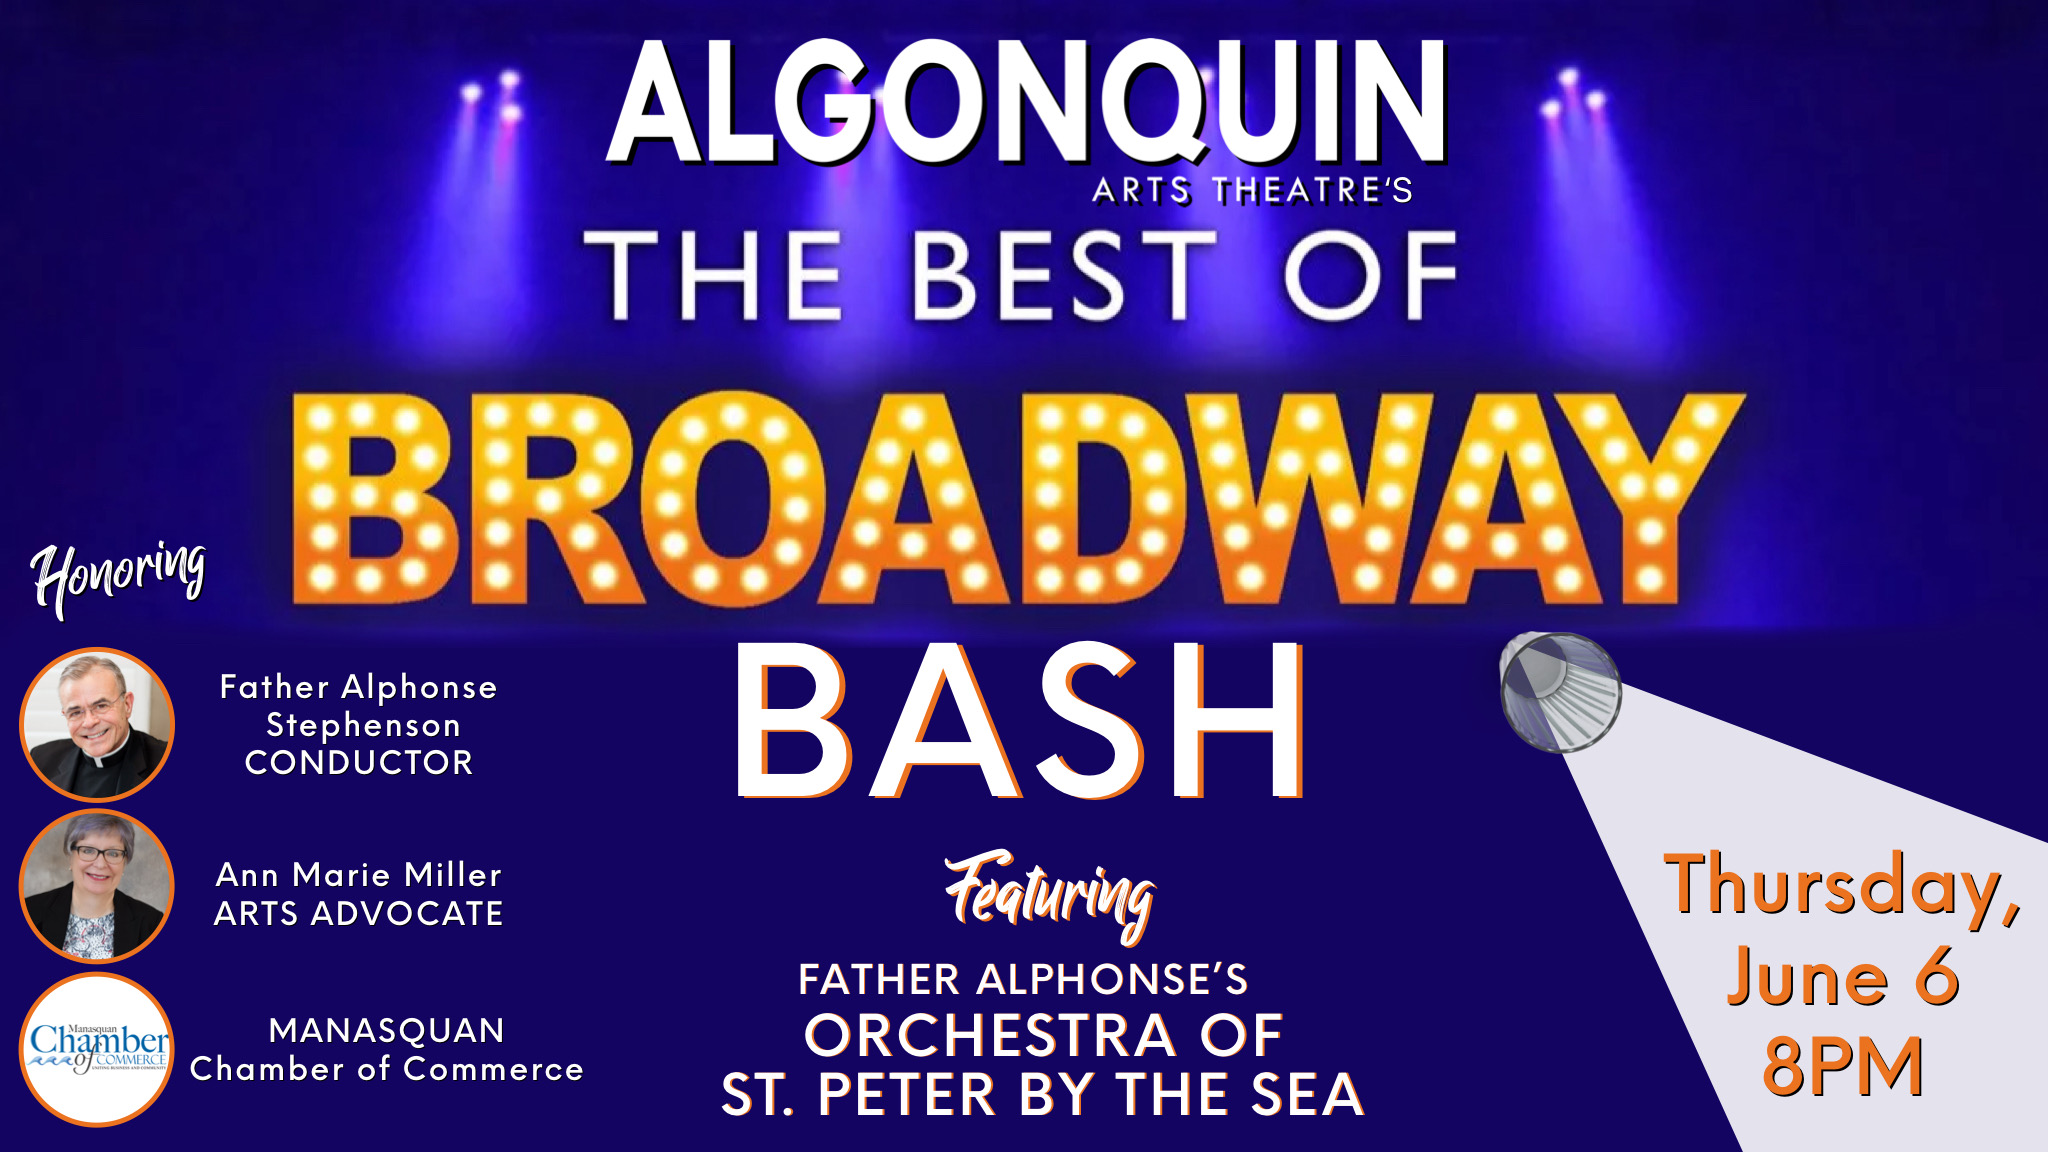 The Best of Broadway Bash